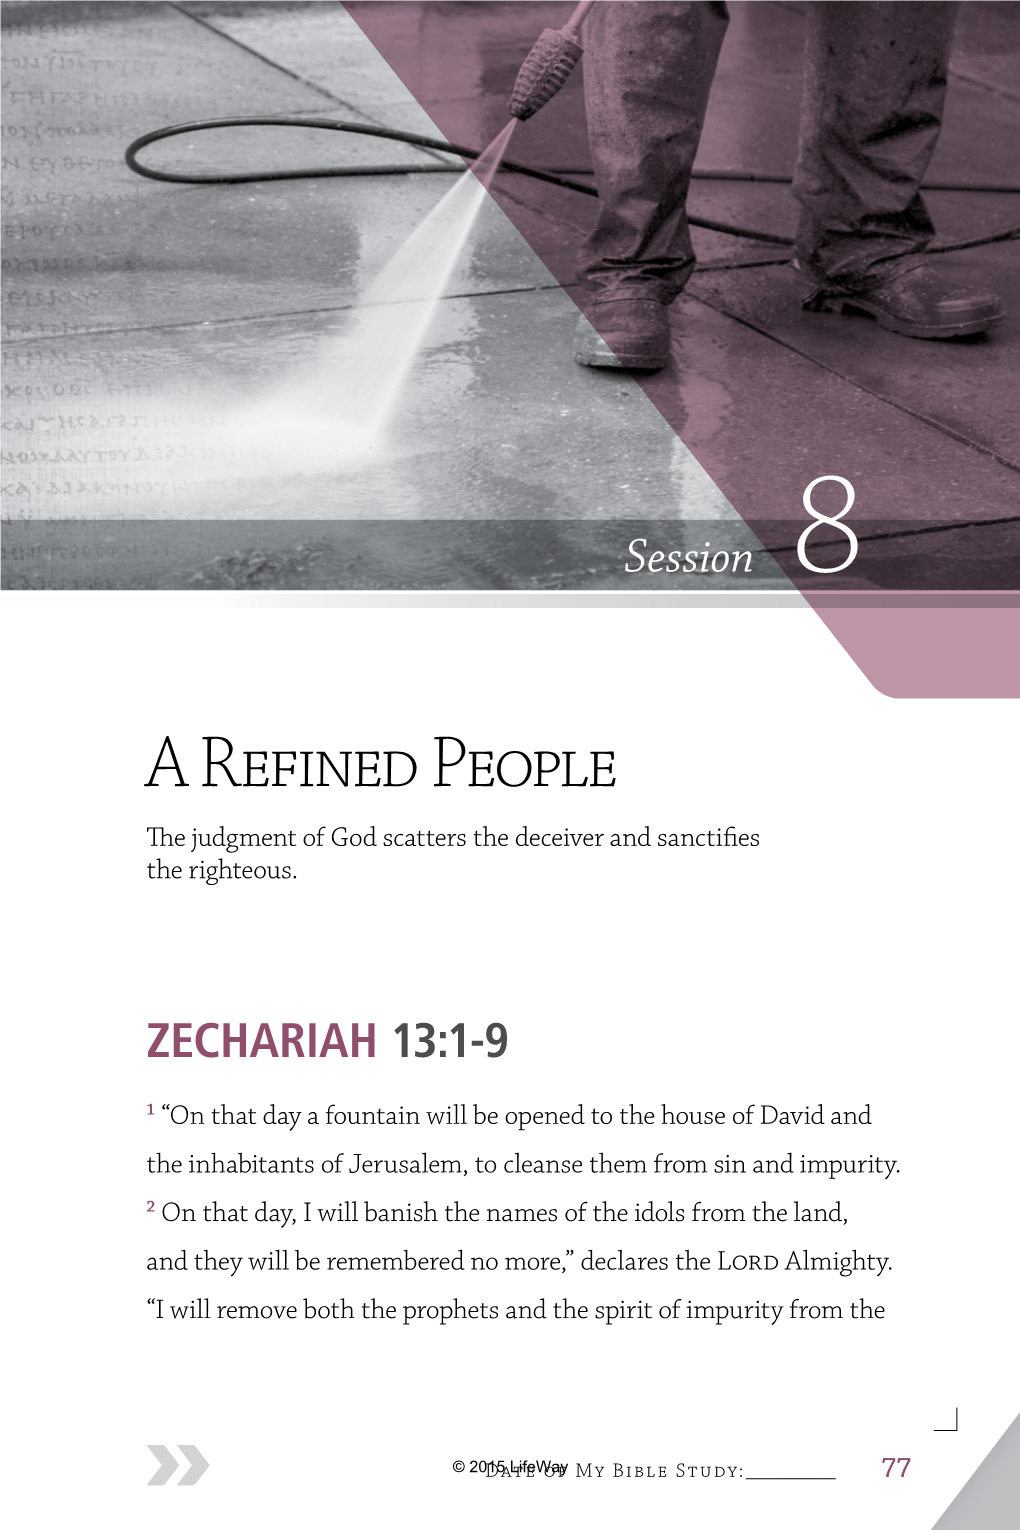 A Refined People the Judgment of God Scatters the Deceiver and Sanctifies the Righteous